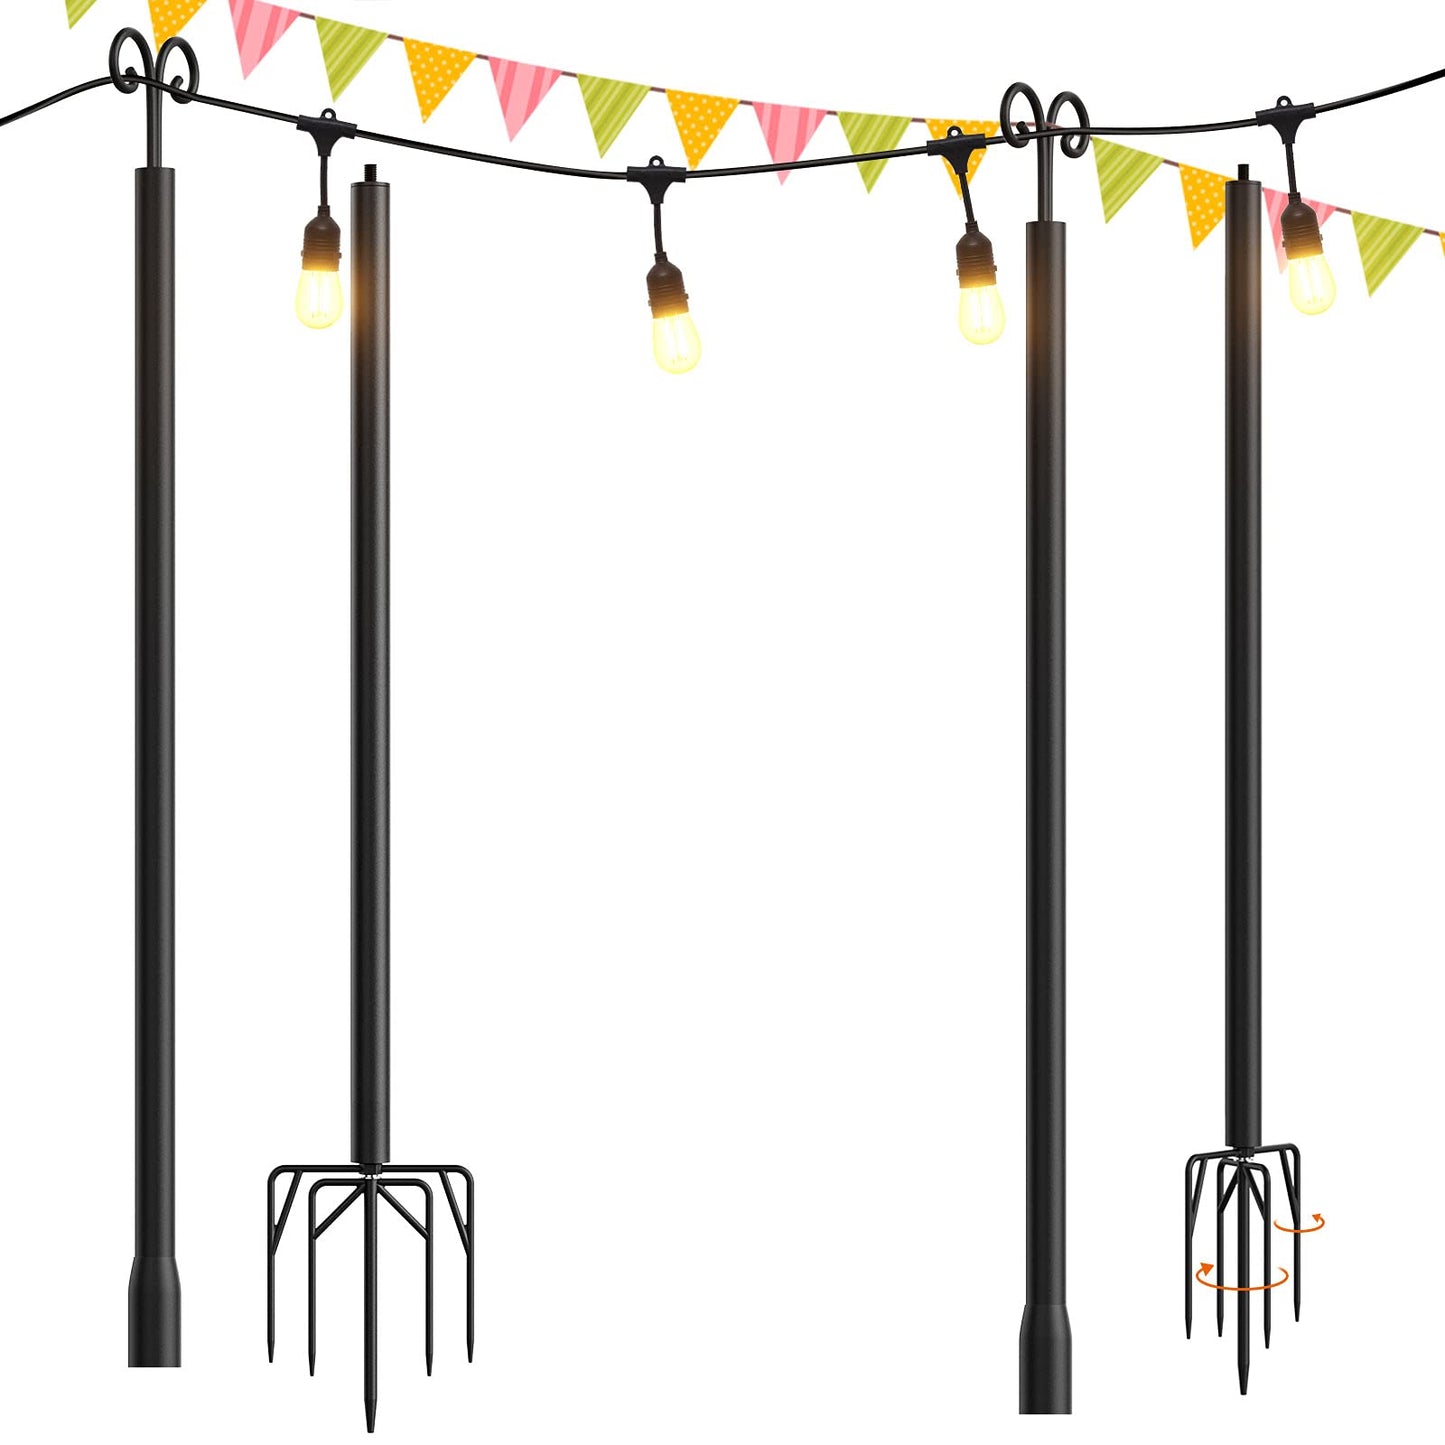 addlon 2 Pack String Lights Poles for Outdoors (2X 10ft), Heavy Duty Designed to Use Year-Round for Your Garden, Patio, Wedding, Party, Birthday Decorations-Black - Like New